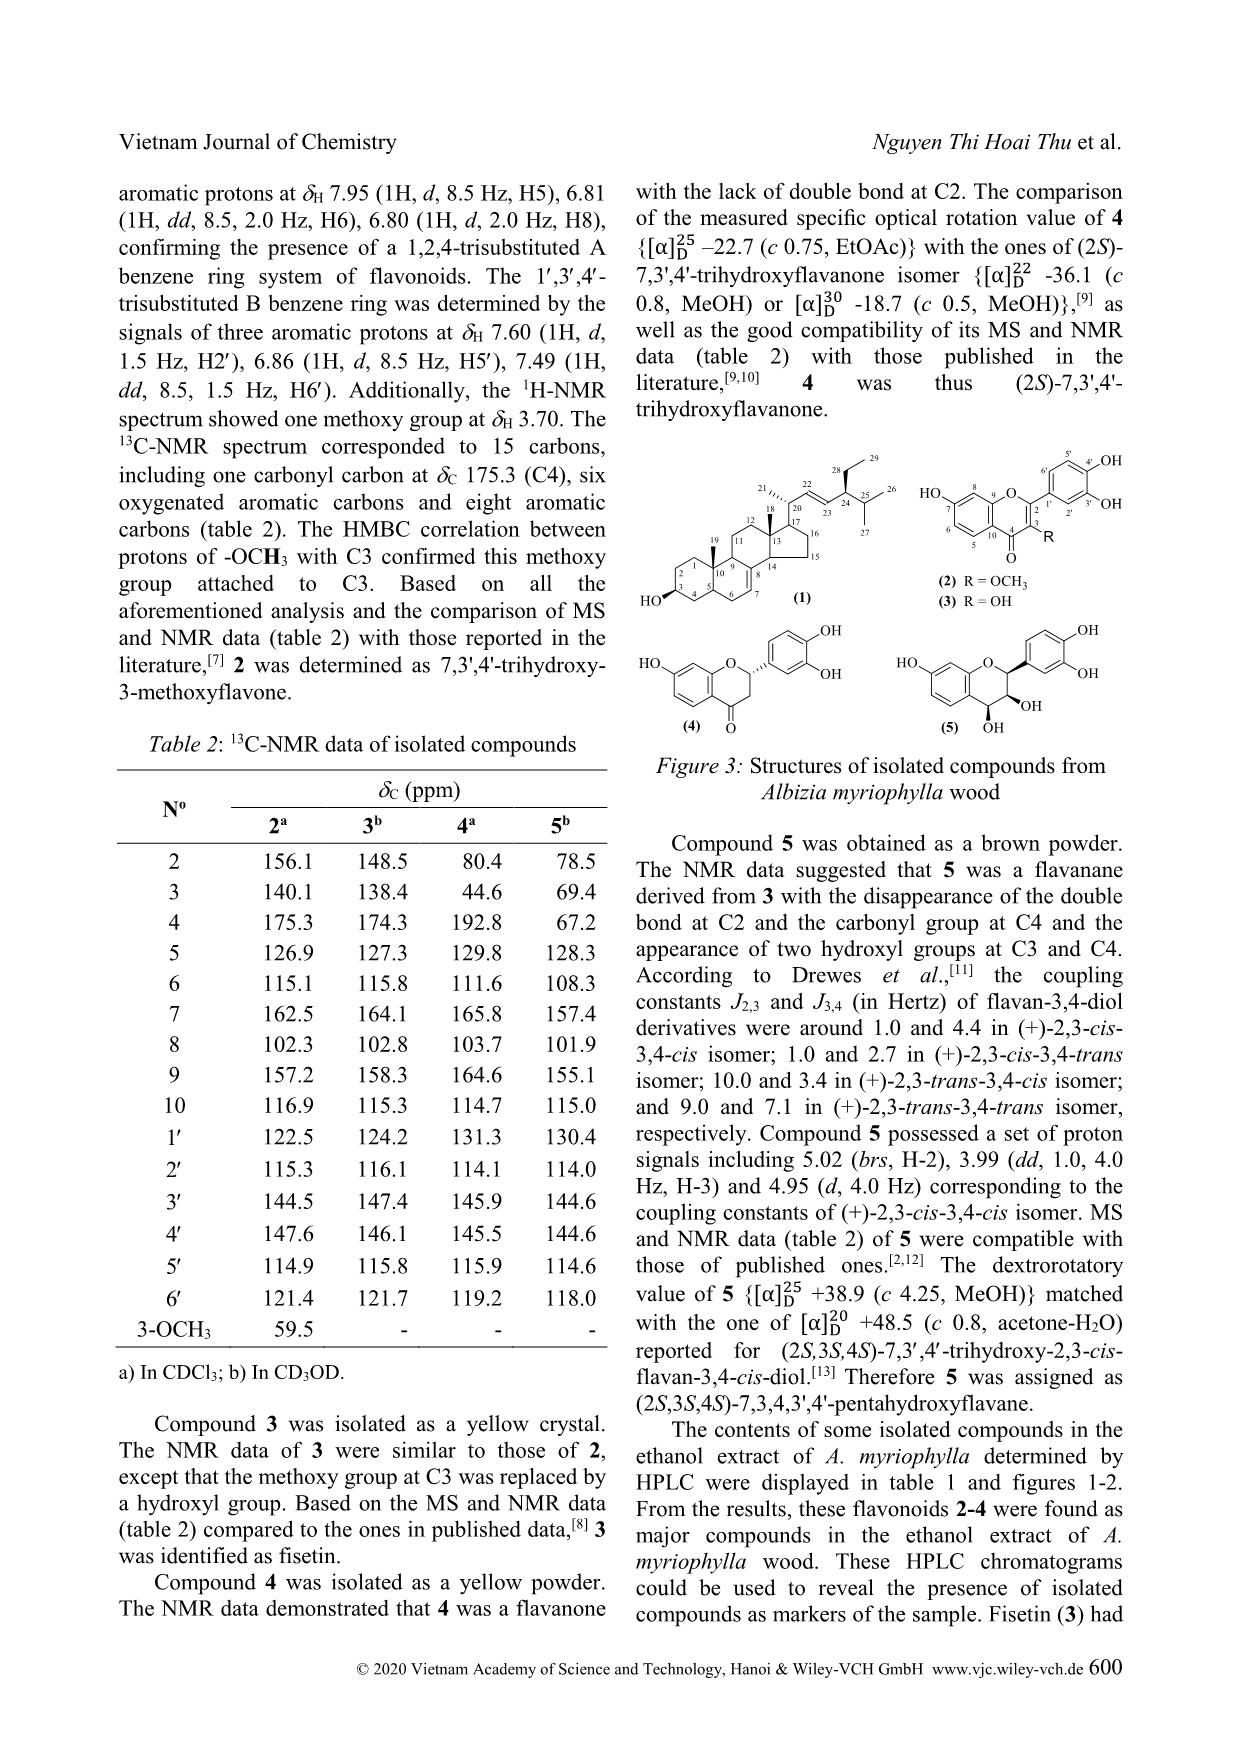 A phytochemical study of the ethyl acetate extract (EtOAc) of Styrax annamensis leaves resulted in the isolation and determination of six known compounds, including three nor-Neolignans type 2-phenylbenzofurans egonol (1), egonoic acid (2) and (–)-machice trang 4